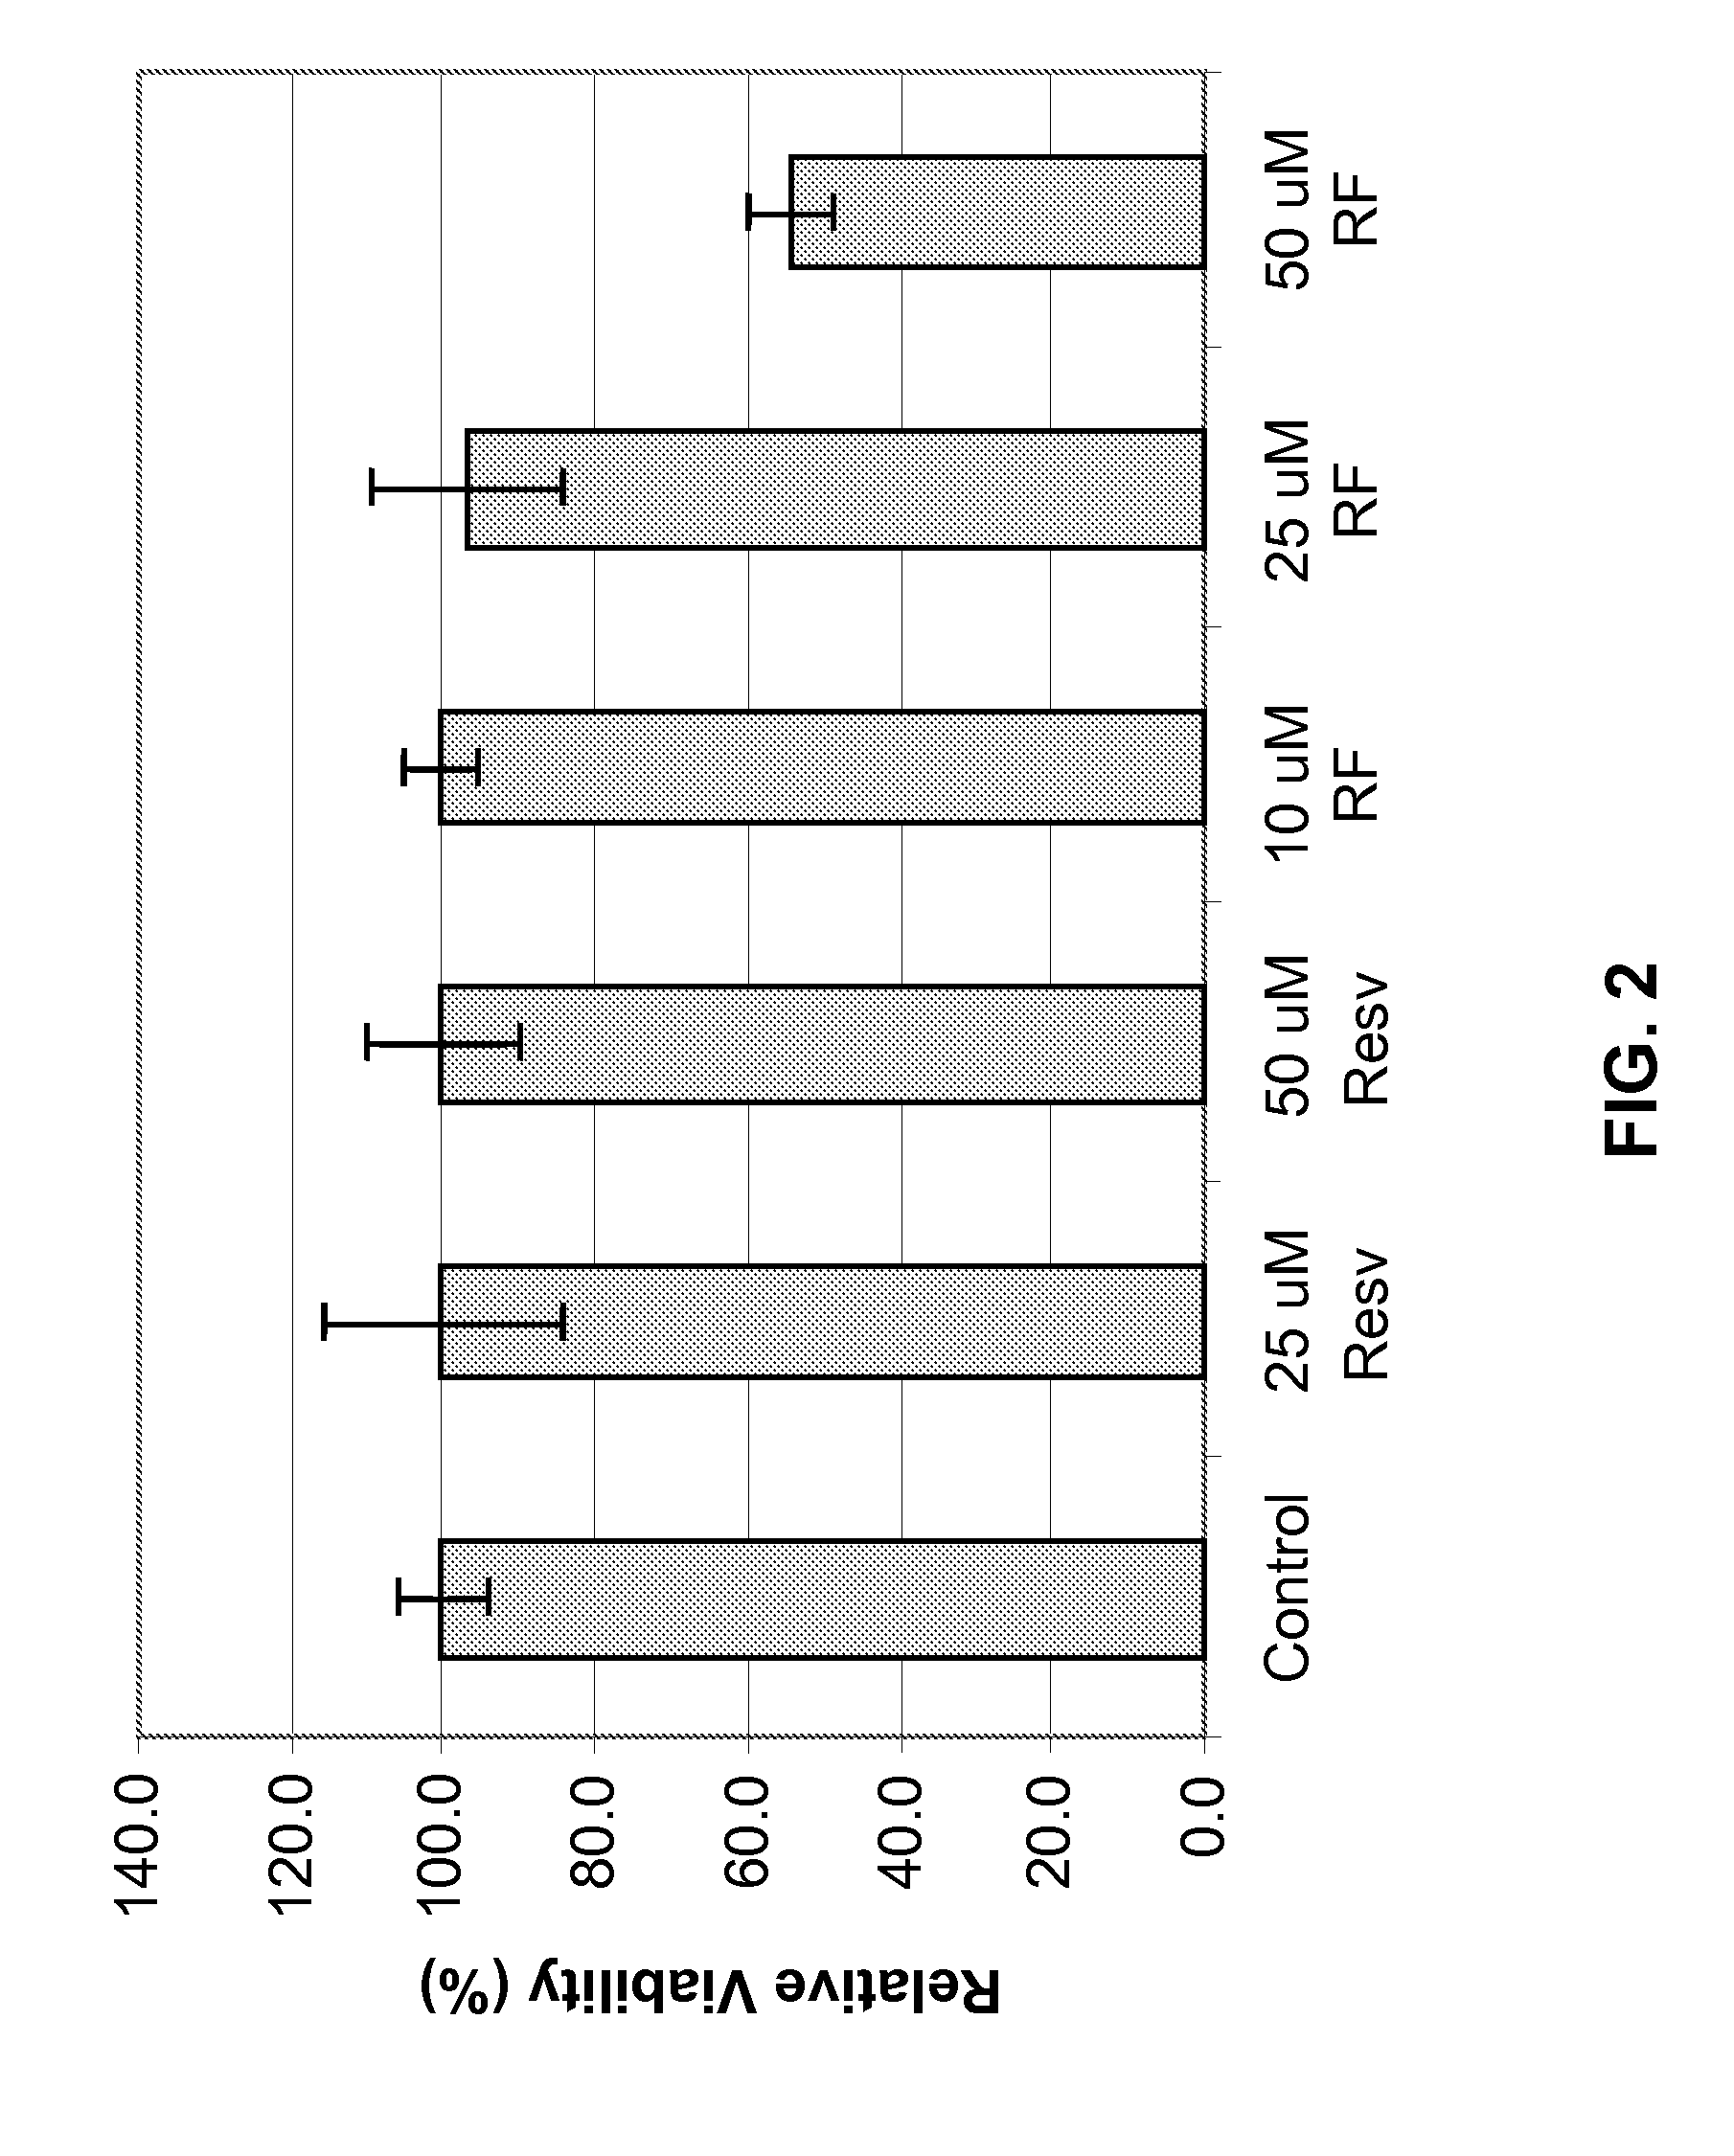 Resveratrol Ferulate Compounds, Compositions Containing The Compounds, And Methods Of Using The Same